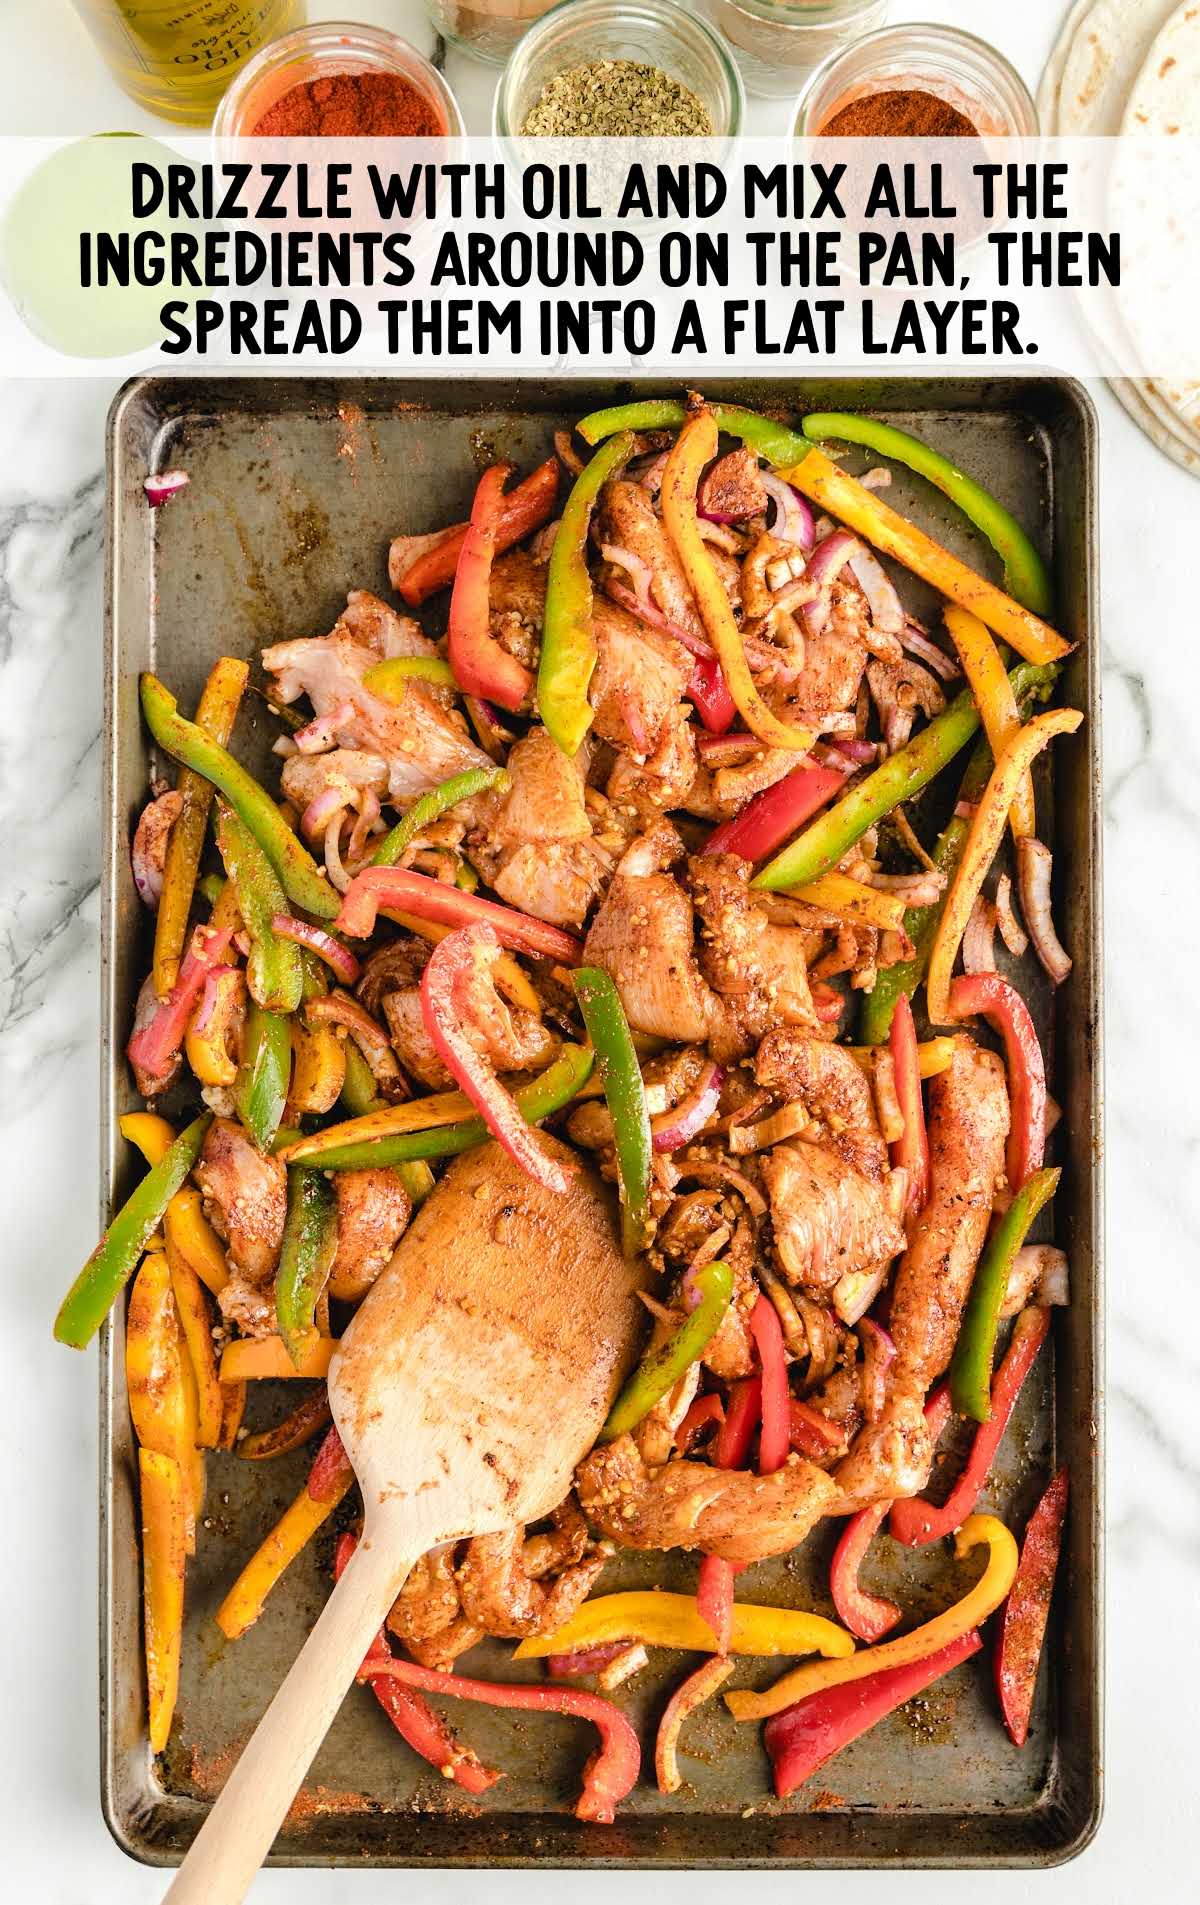 Fajitas ingredients drizzled with oil and mixed around on a sheet pan